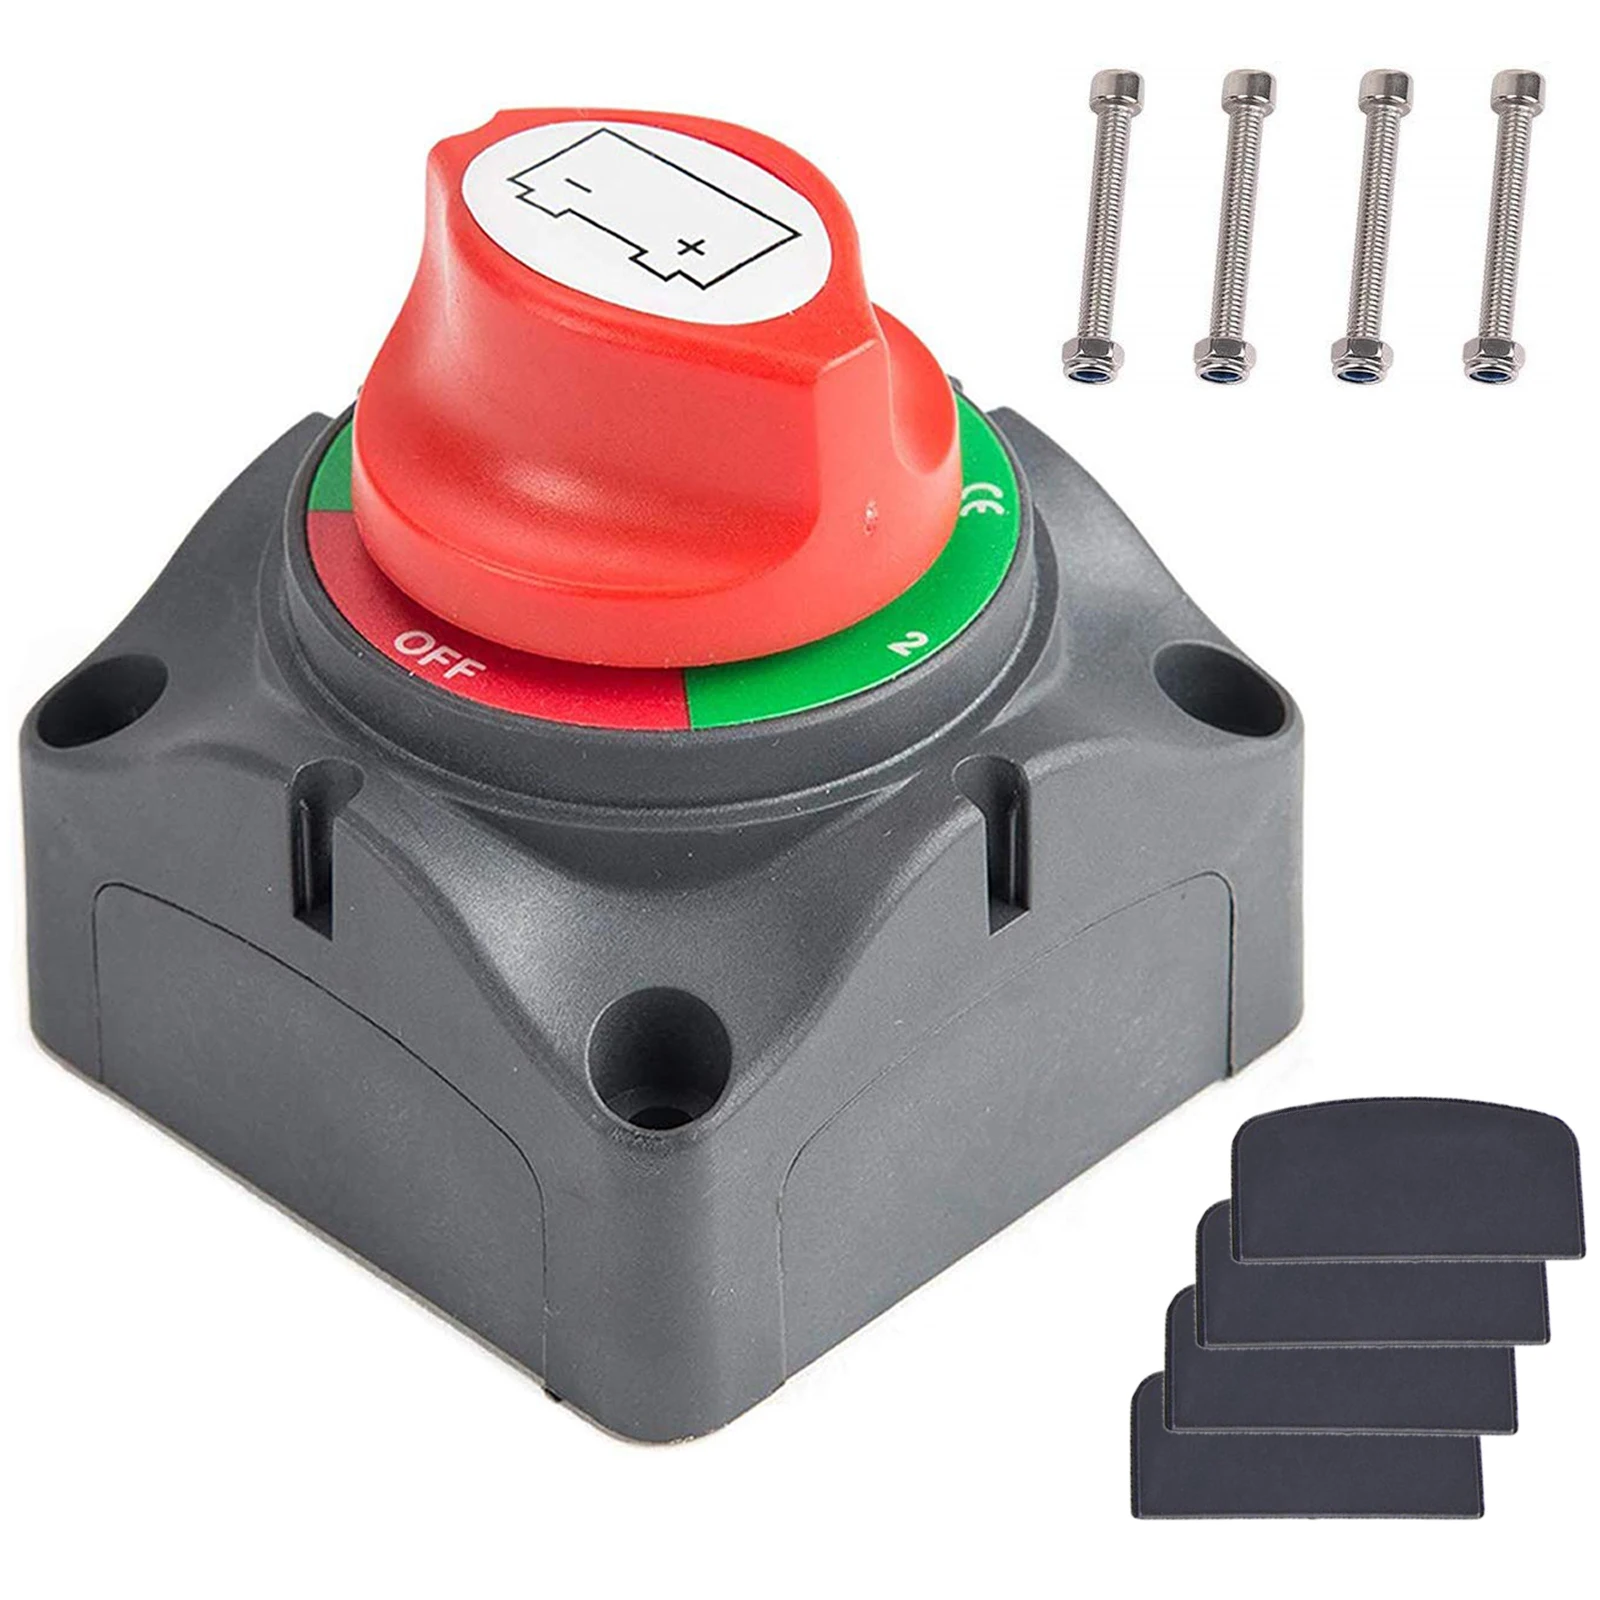 KIMISS 6MM 300A Car Truck Boat Battery Isolator Disconnect Cut Off Power Kill Switch 